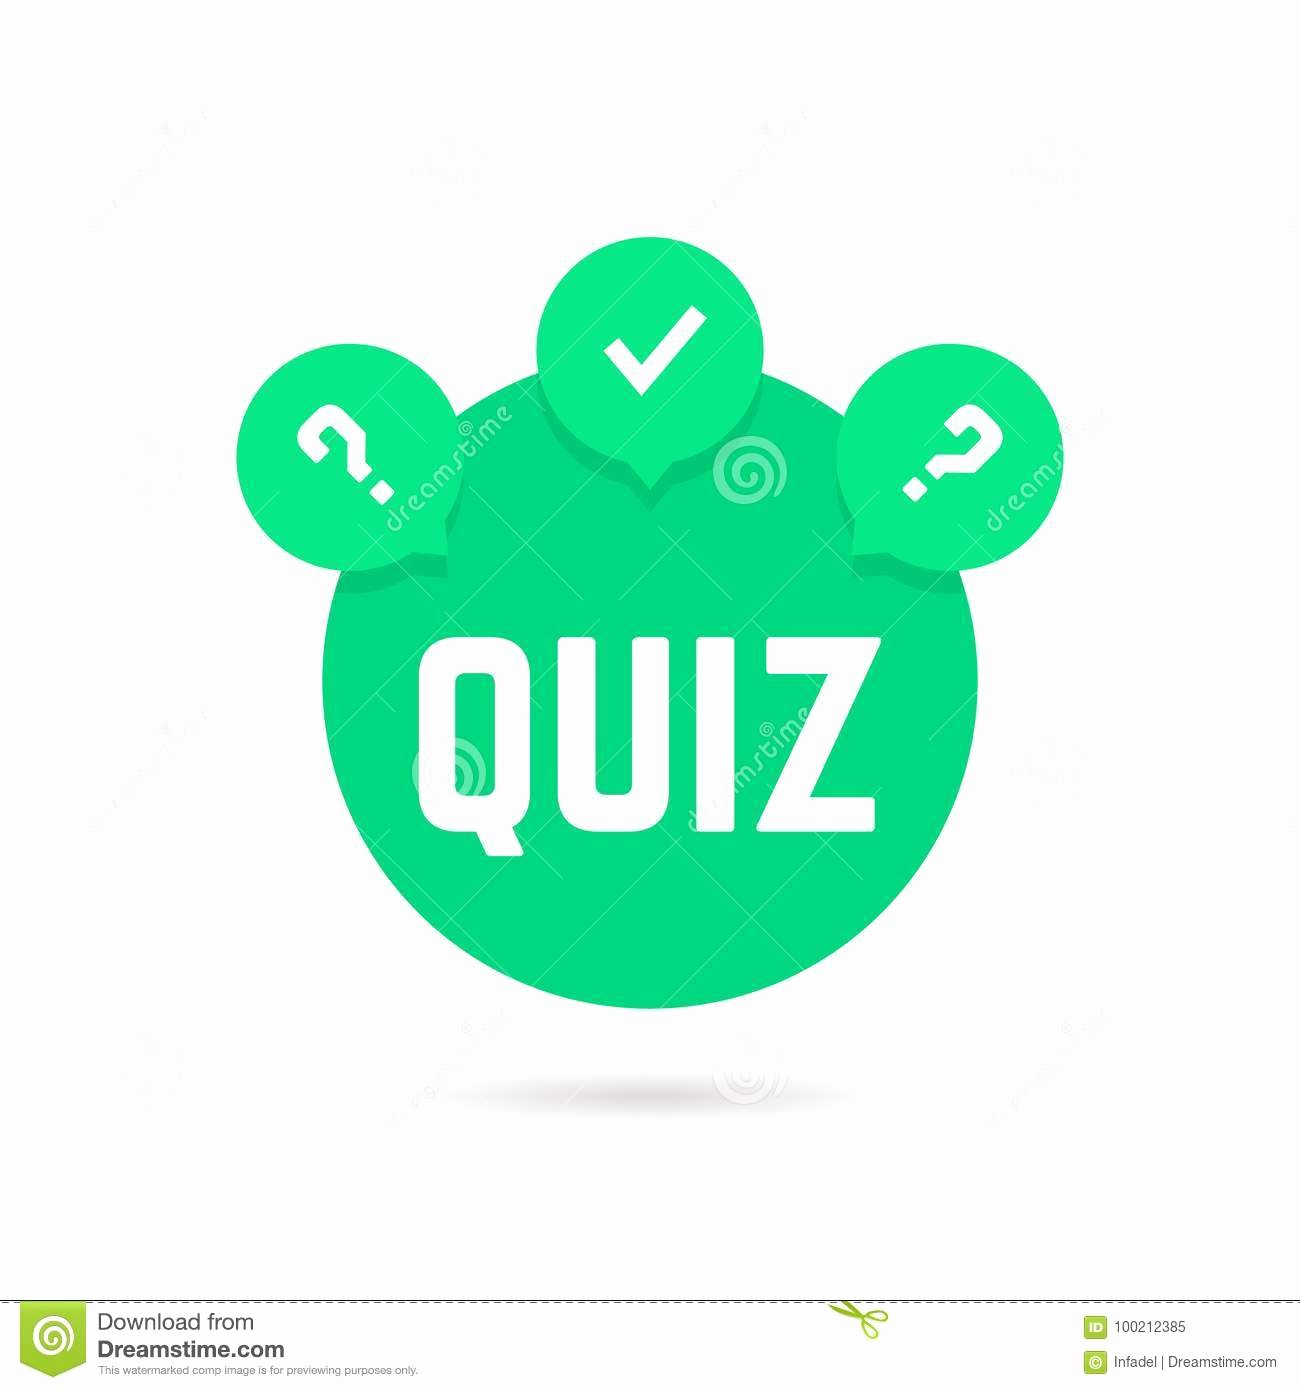 Tv Show Concept Template Awesome Green Quiz Icon with Speech Bubble Stock Vector Image